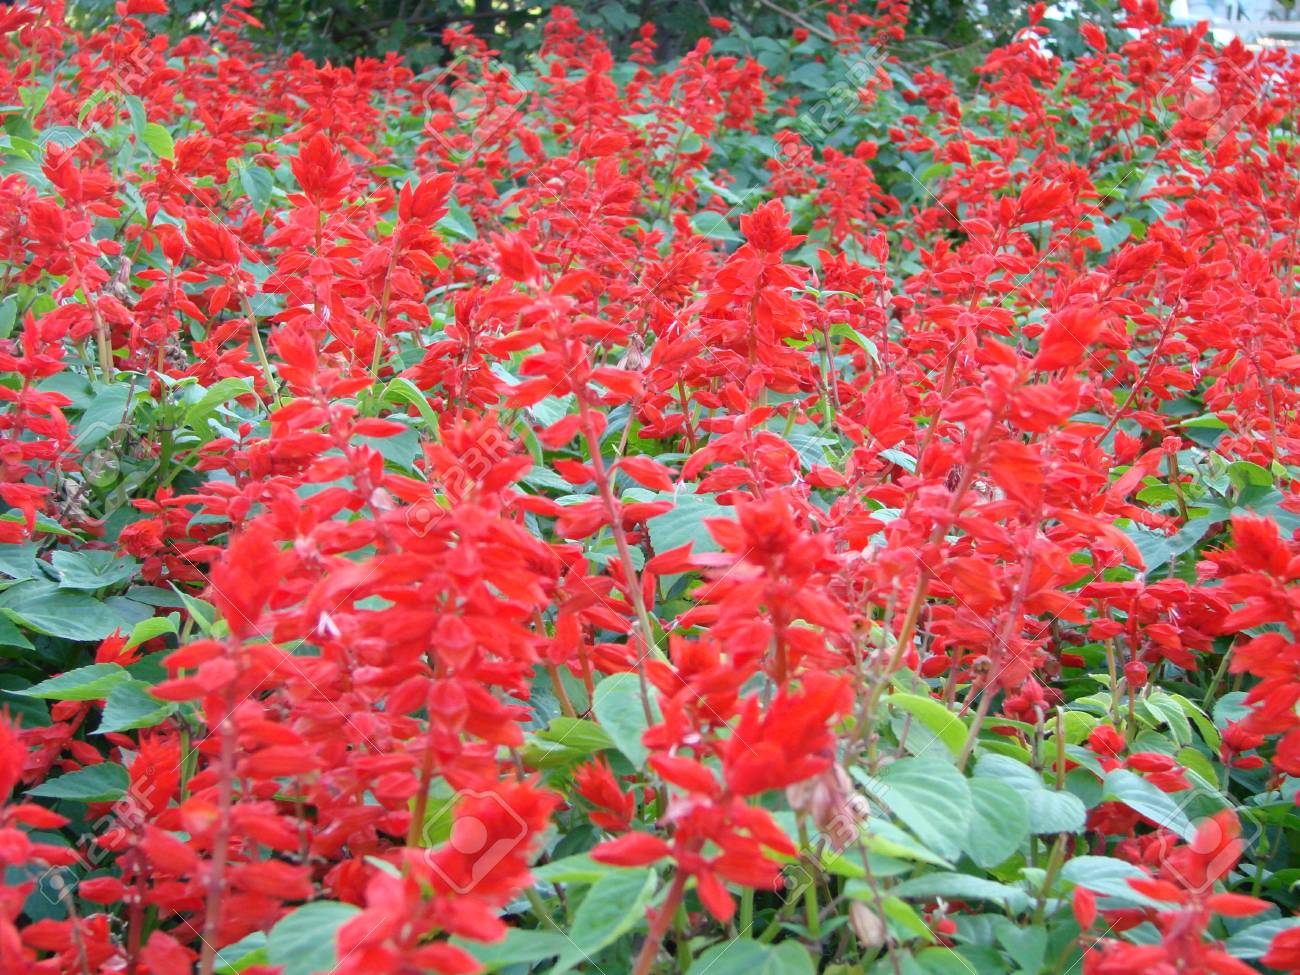 Salvia Divinorum Red Flowers Among Green Leaves On A Light